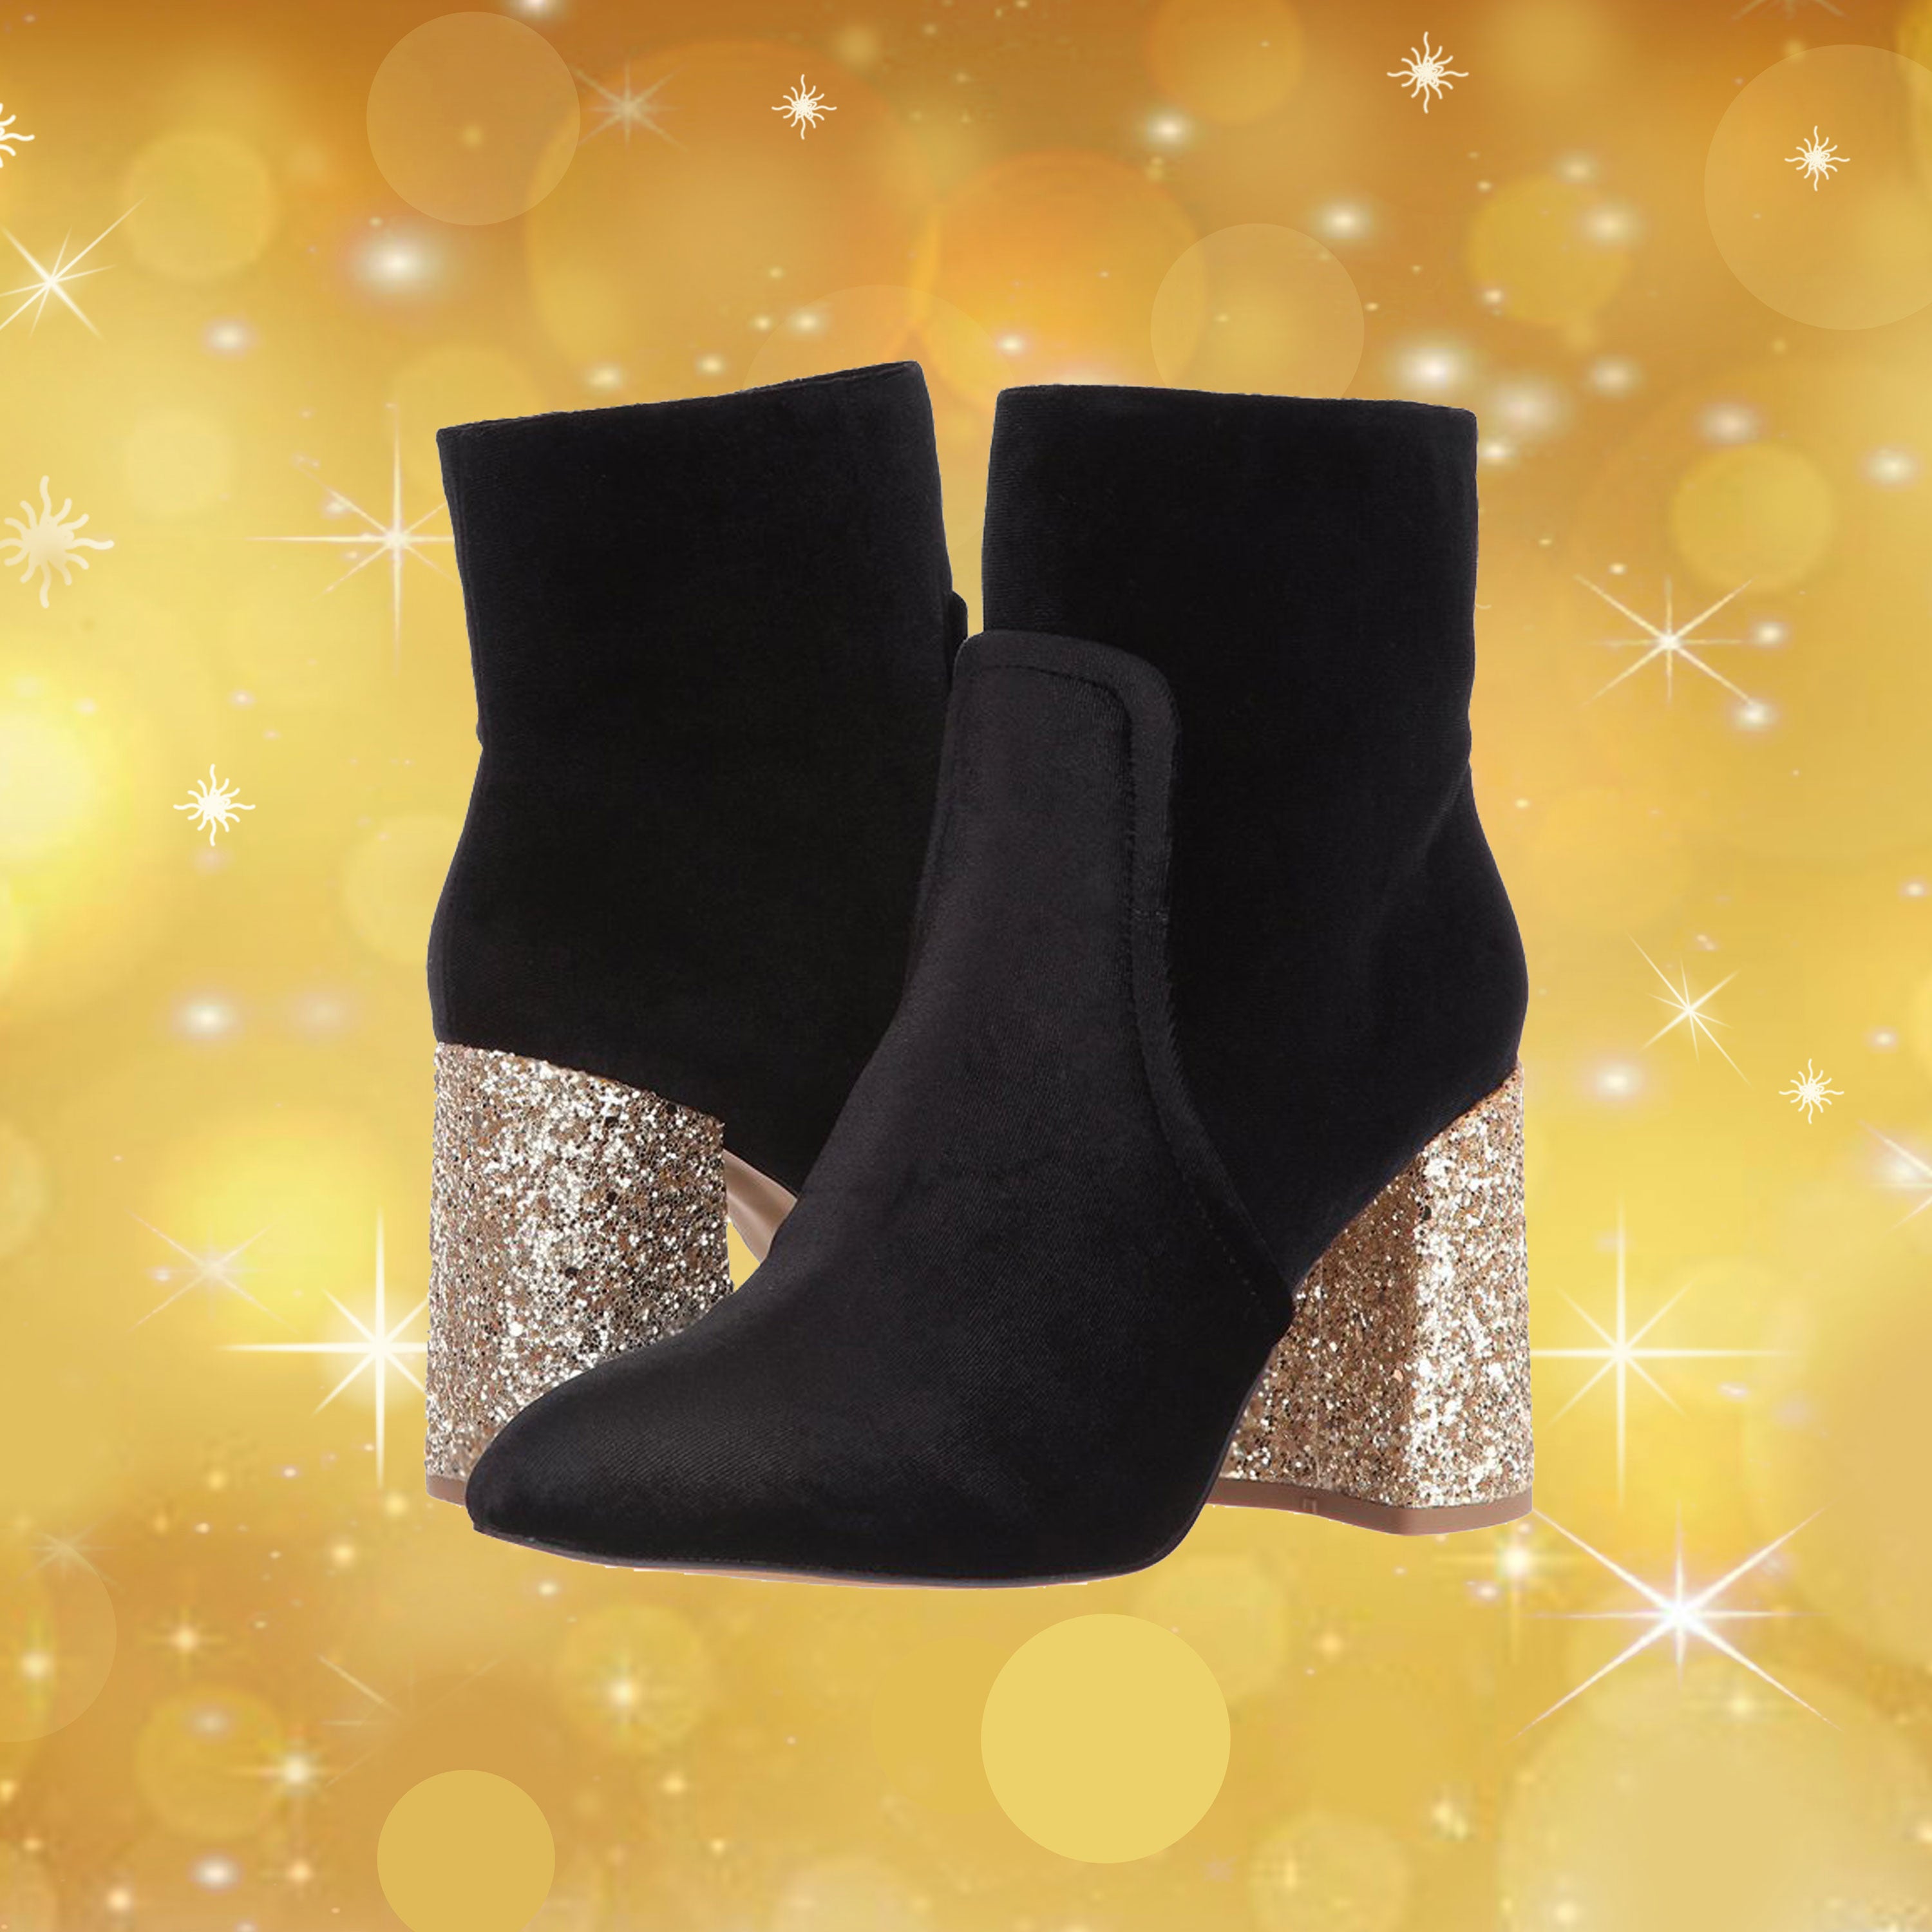 New Year's Eve Shoes So Comfortable, You'll Actually Wear Them Until the Ball Drops
